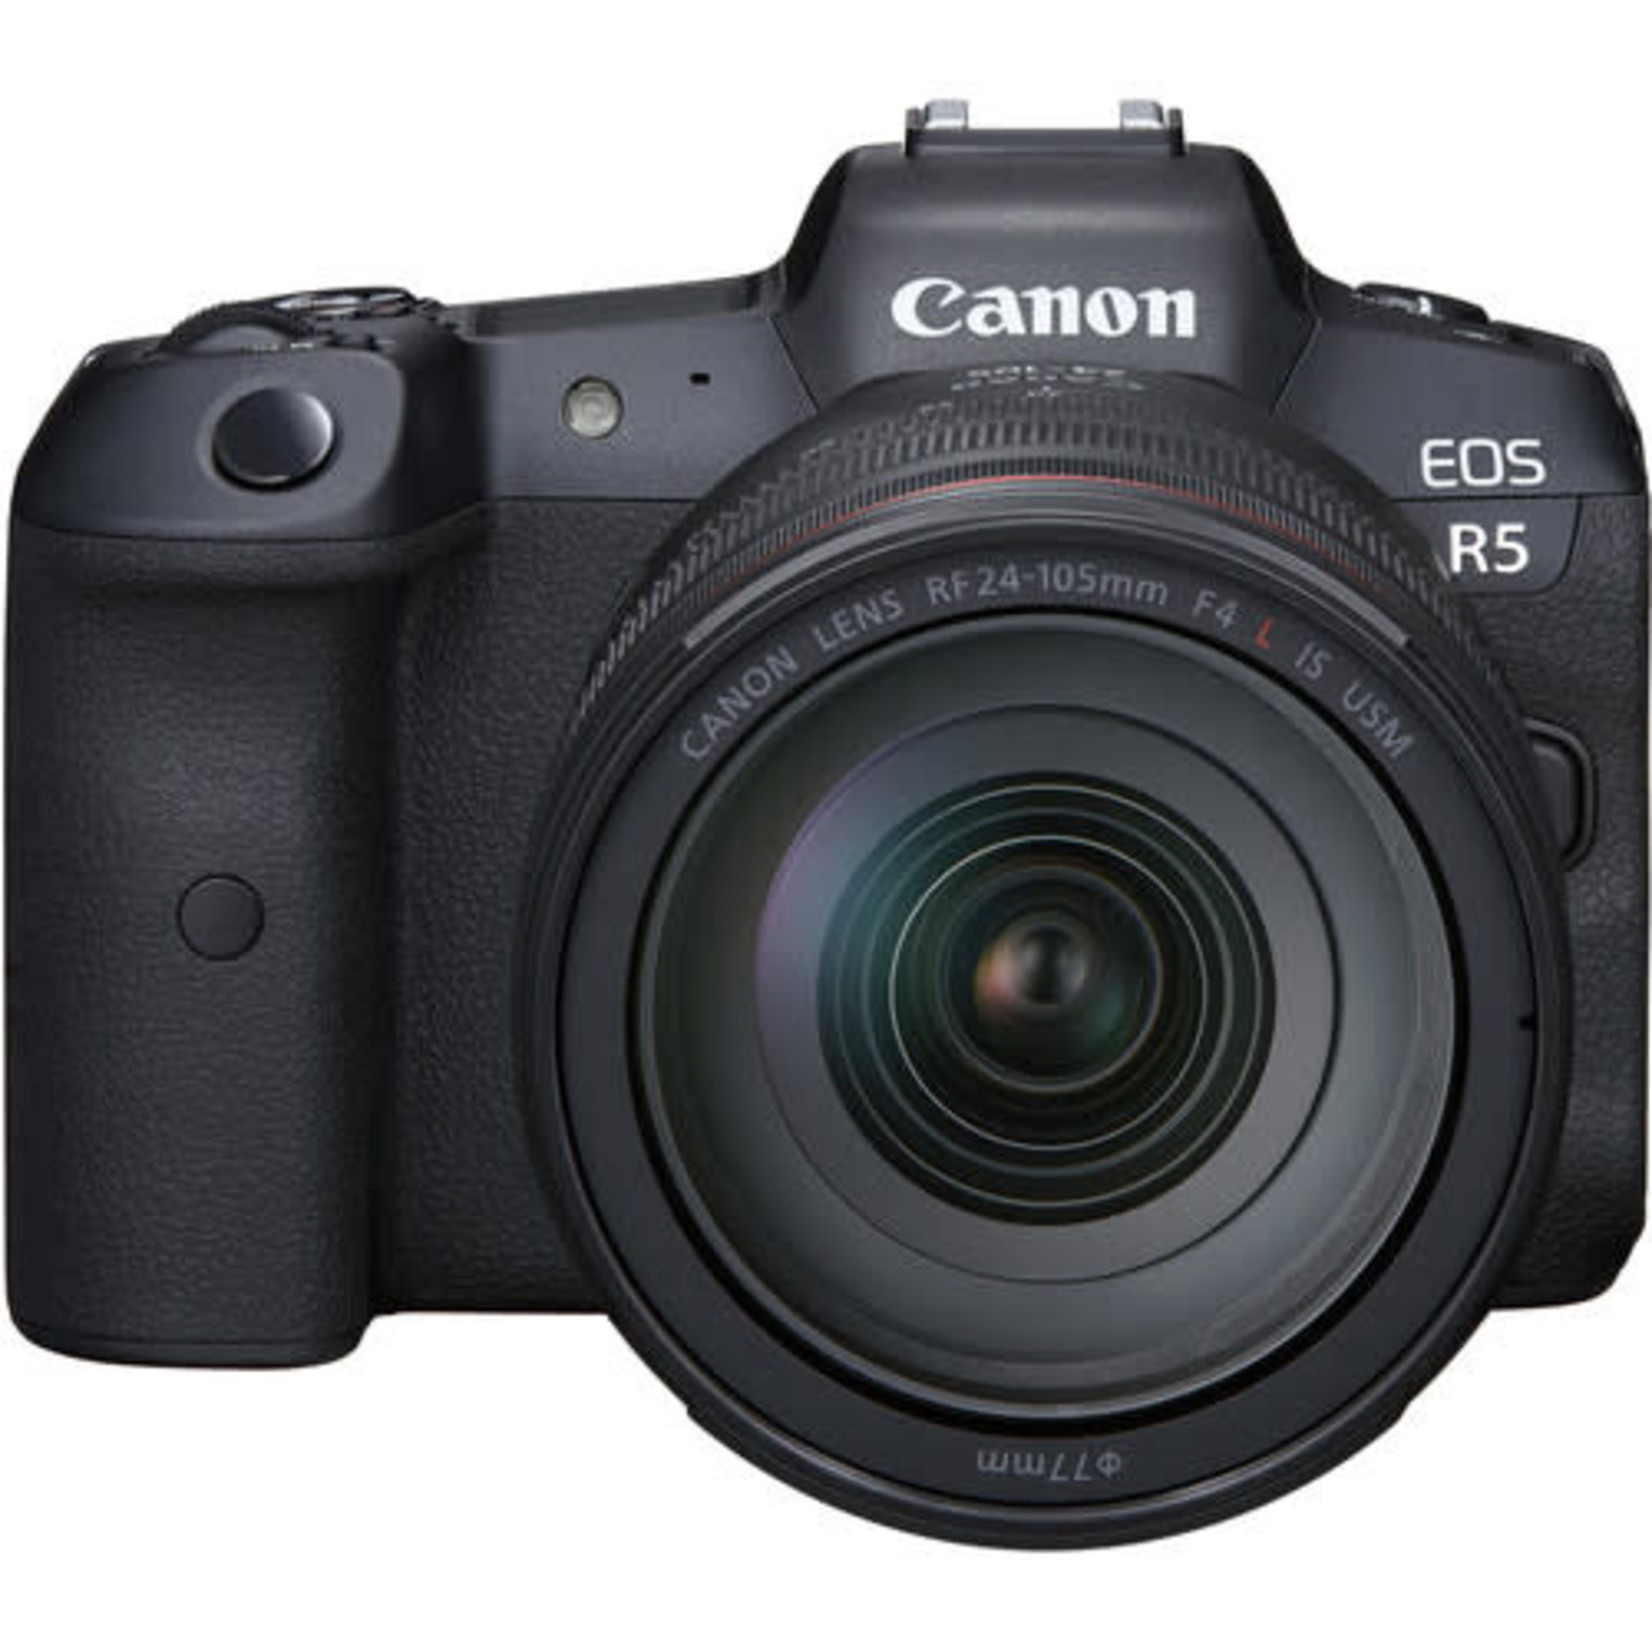 Canon Canon EOS R5 Mirrorless Digital Camera with 24-105mm f/4L Lens